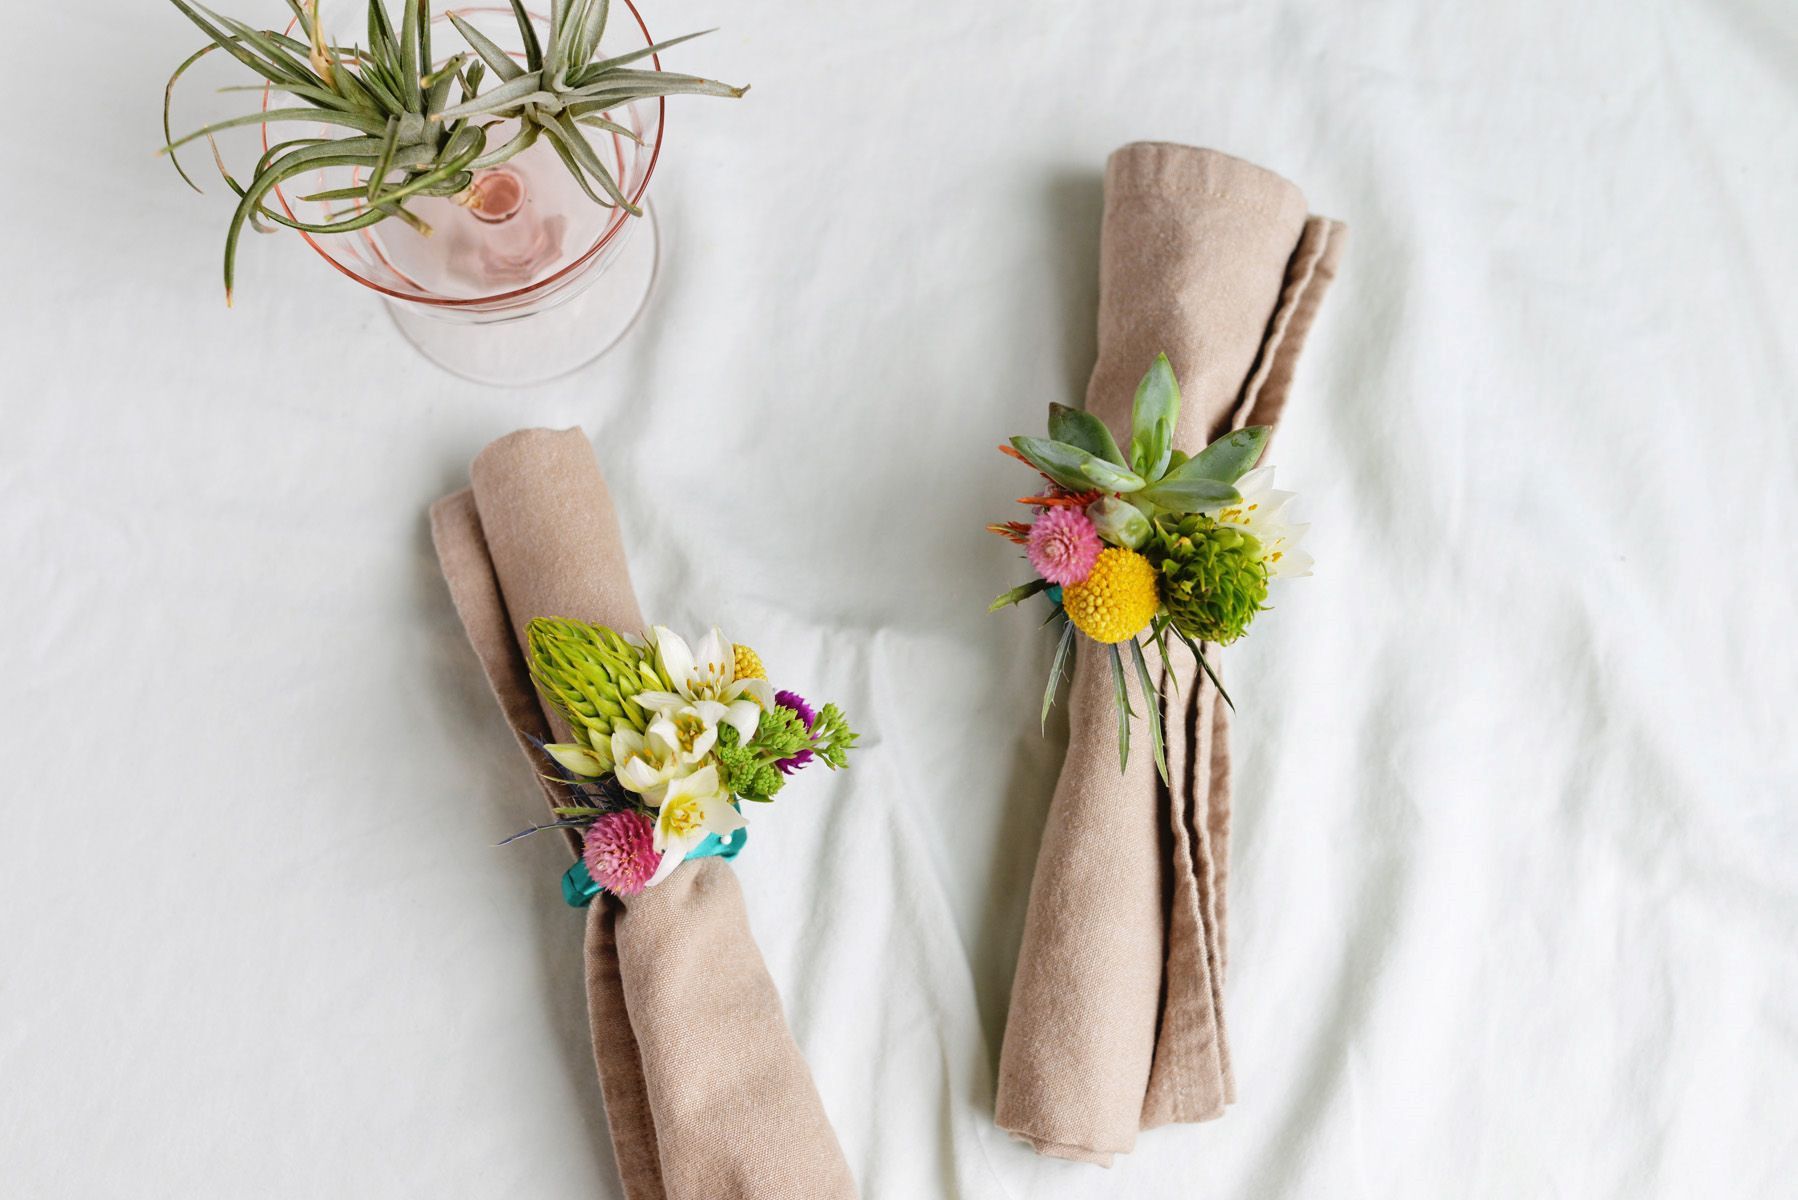 How To Make Your Own Napkin Rings